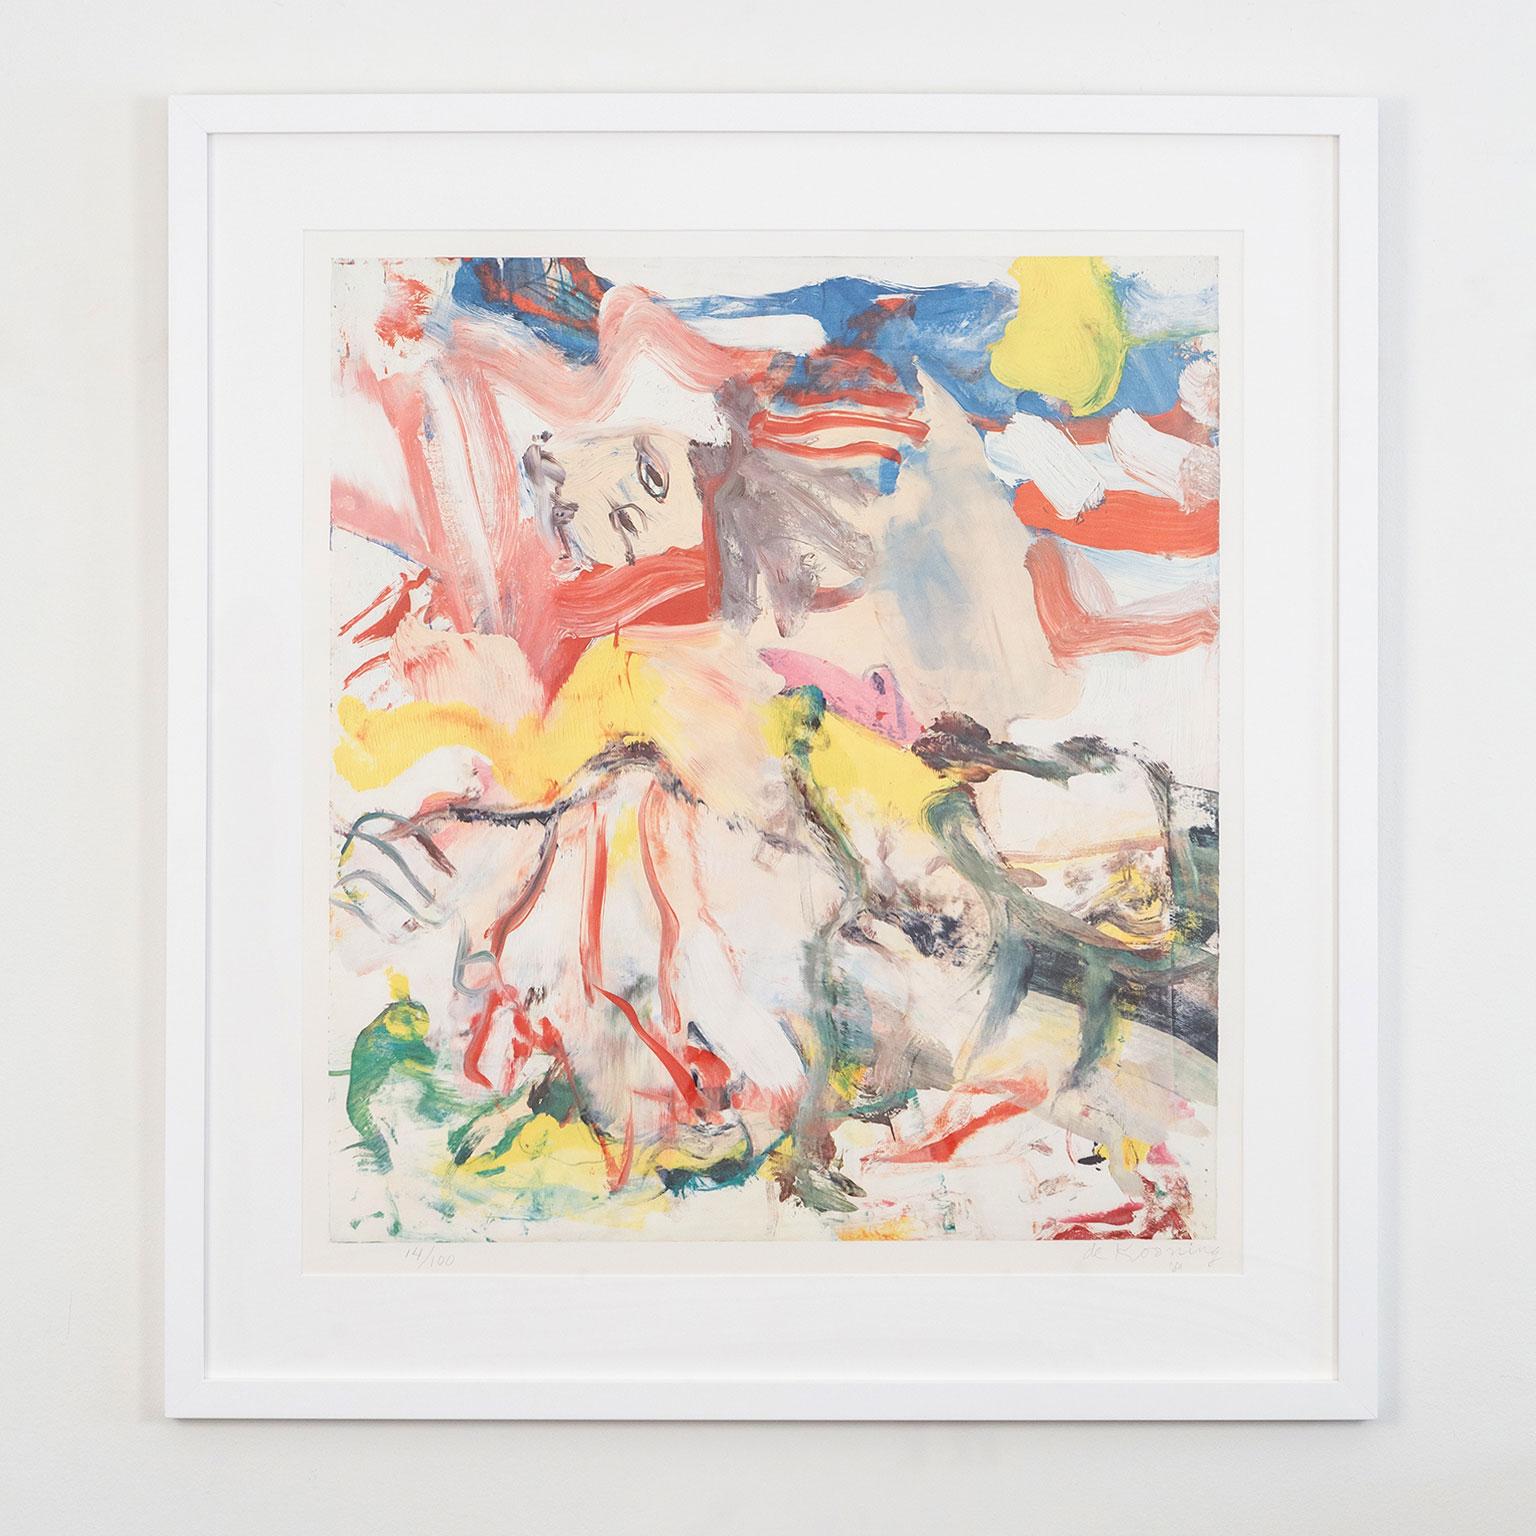 "Figures in a Landscape VI" USA, 1980, Lithograph, Signed and dated by artist - Print by Willem de Kooning